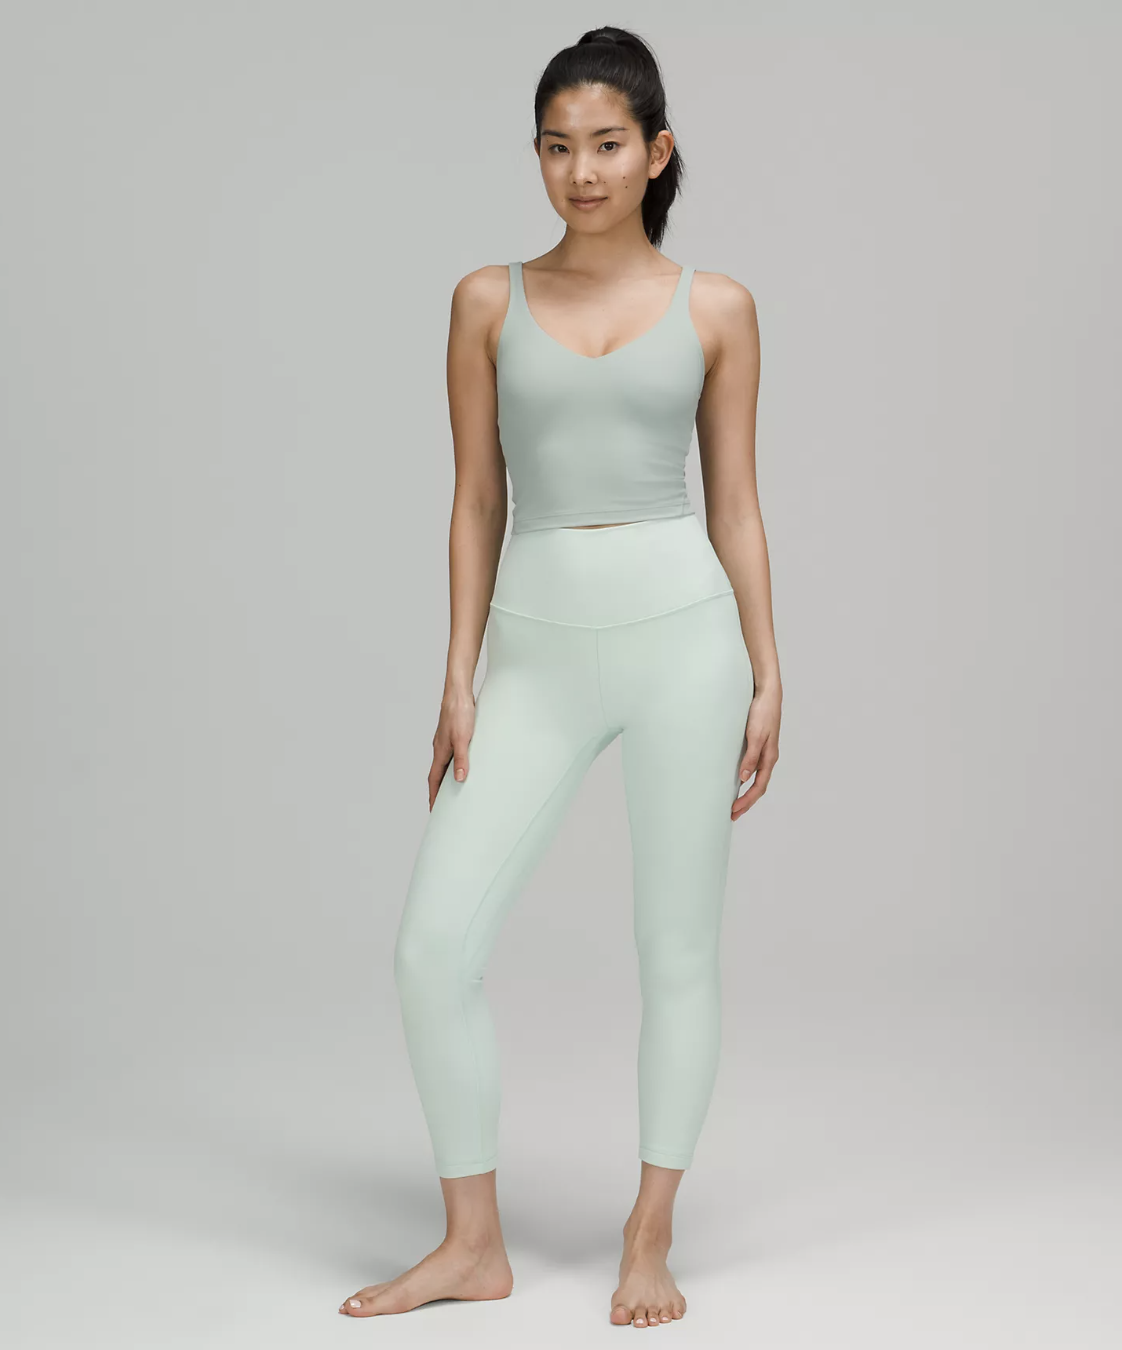 A person wearing the Align leggings and tank